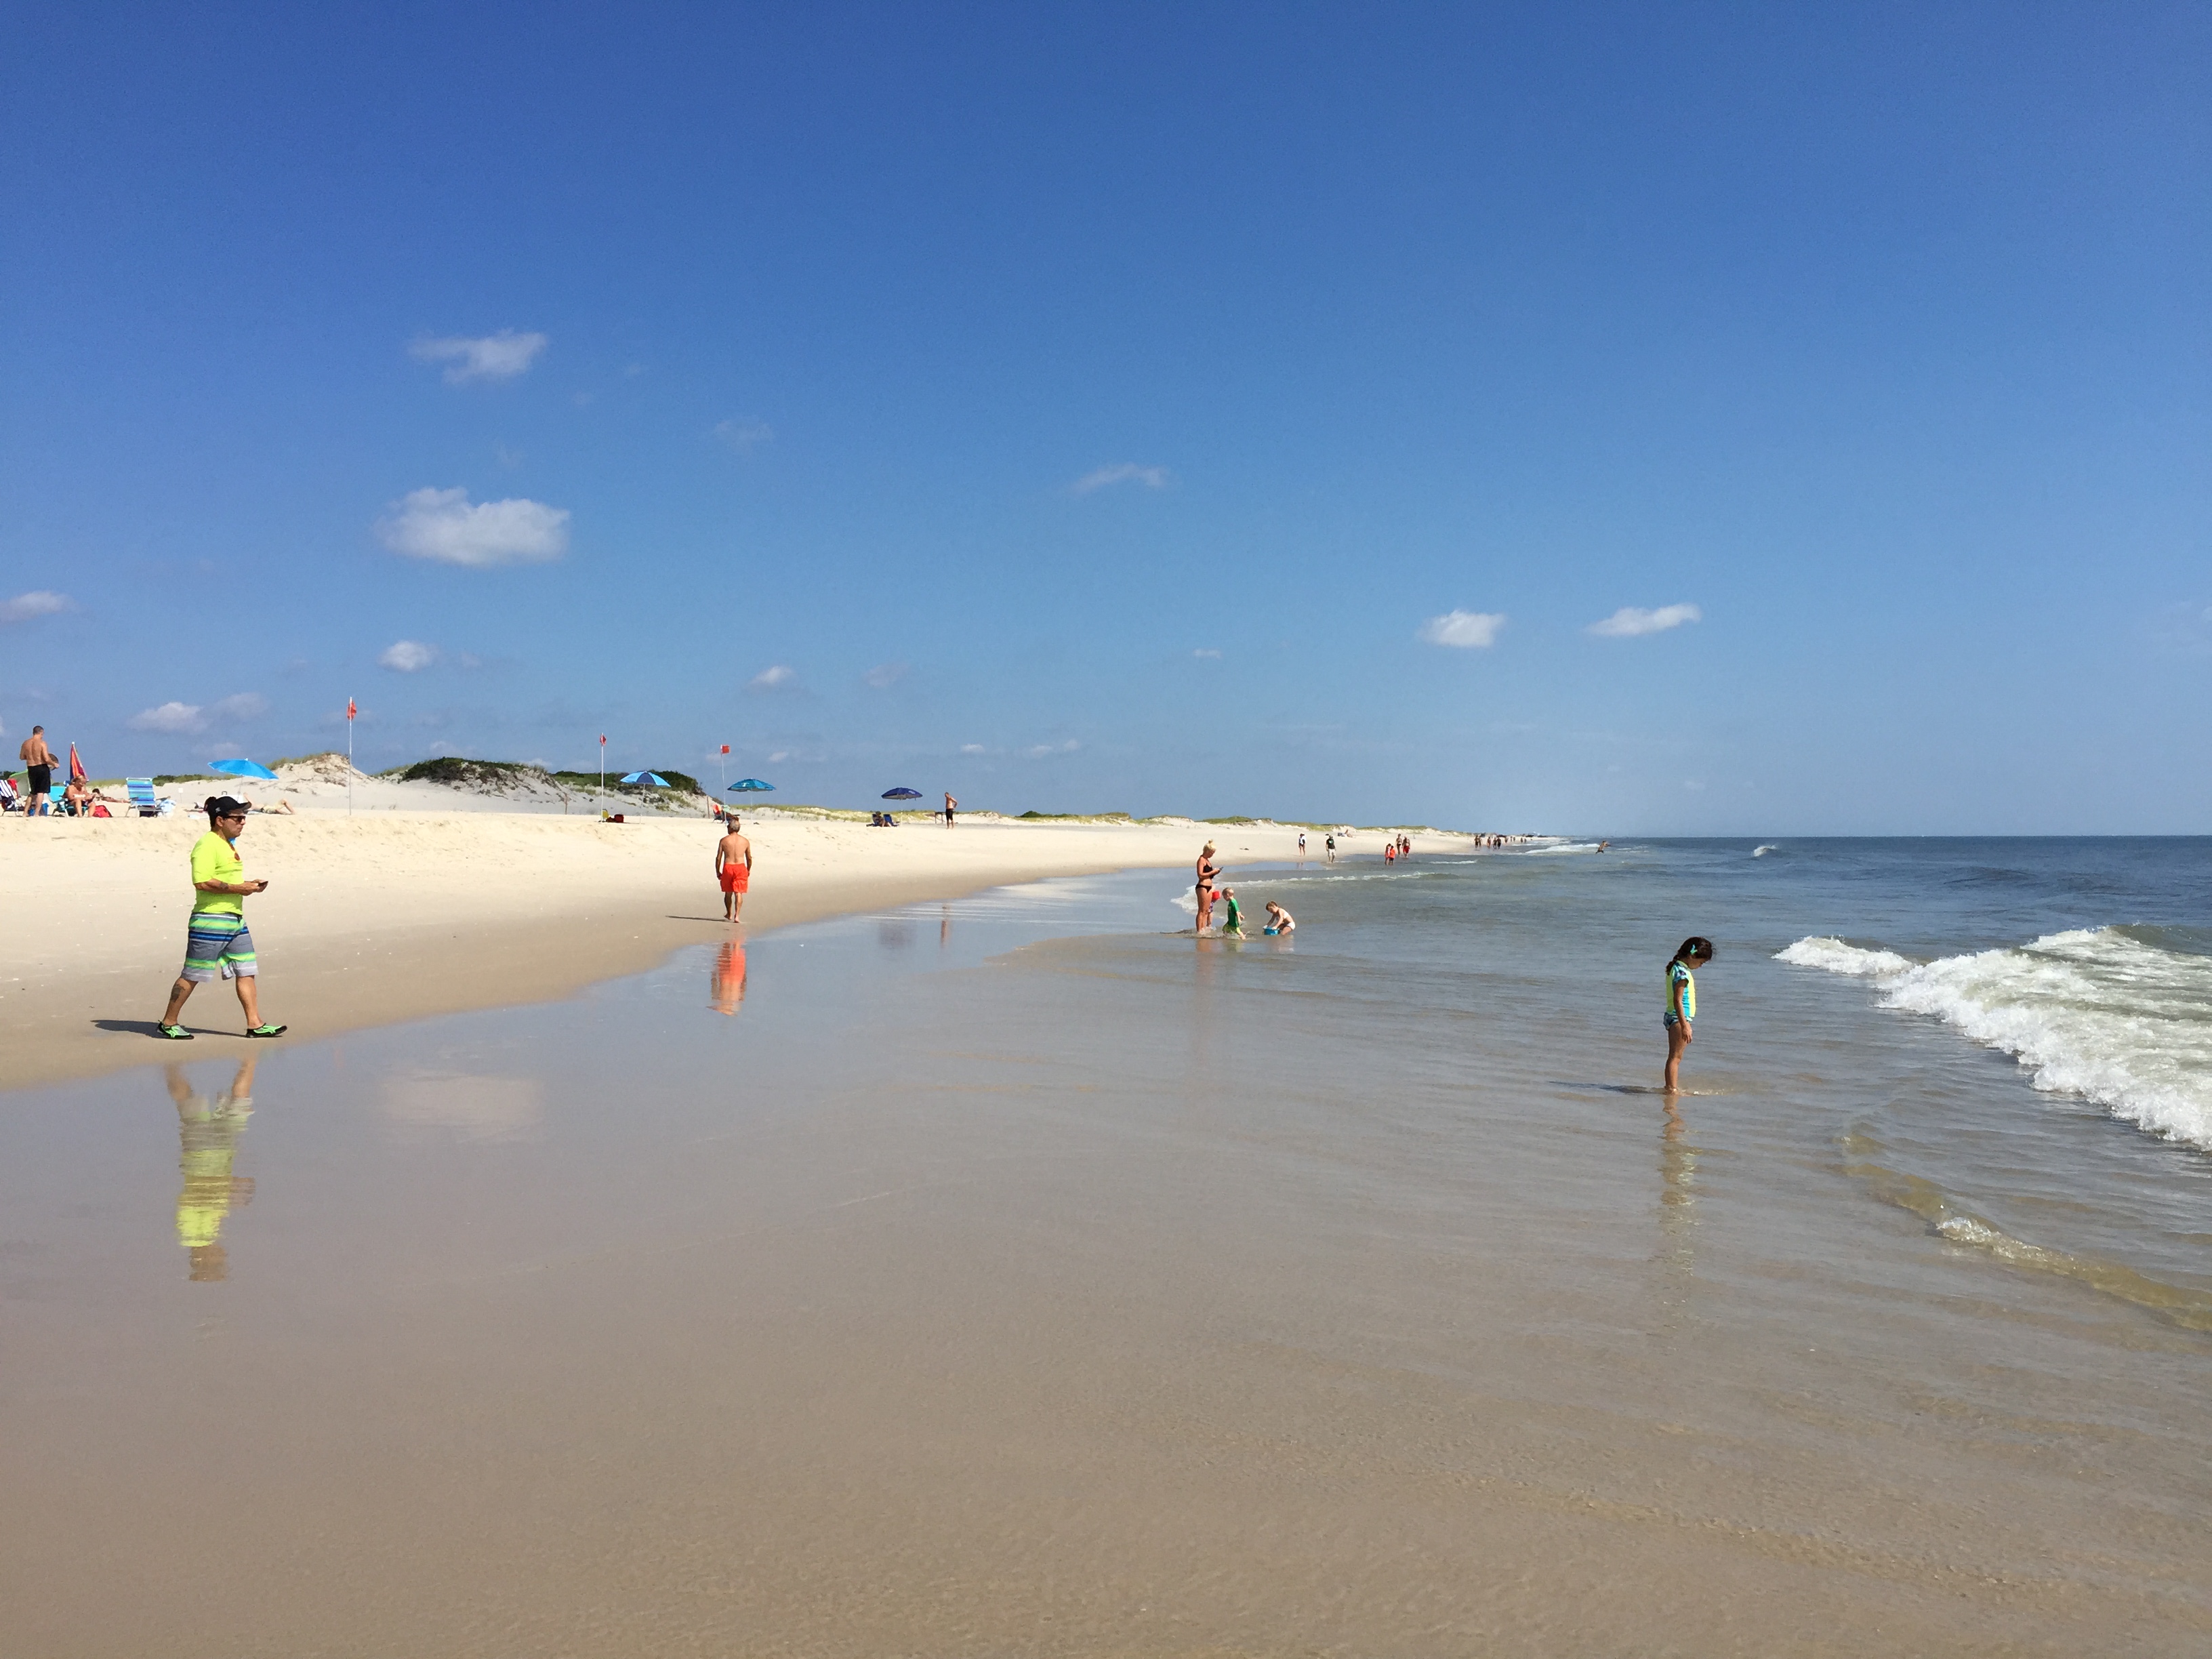 File:2016-08-14 10 21 18 View north up the beach from the waters ...